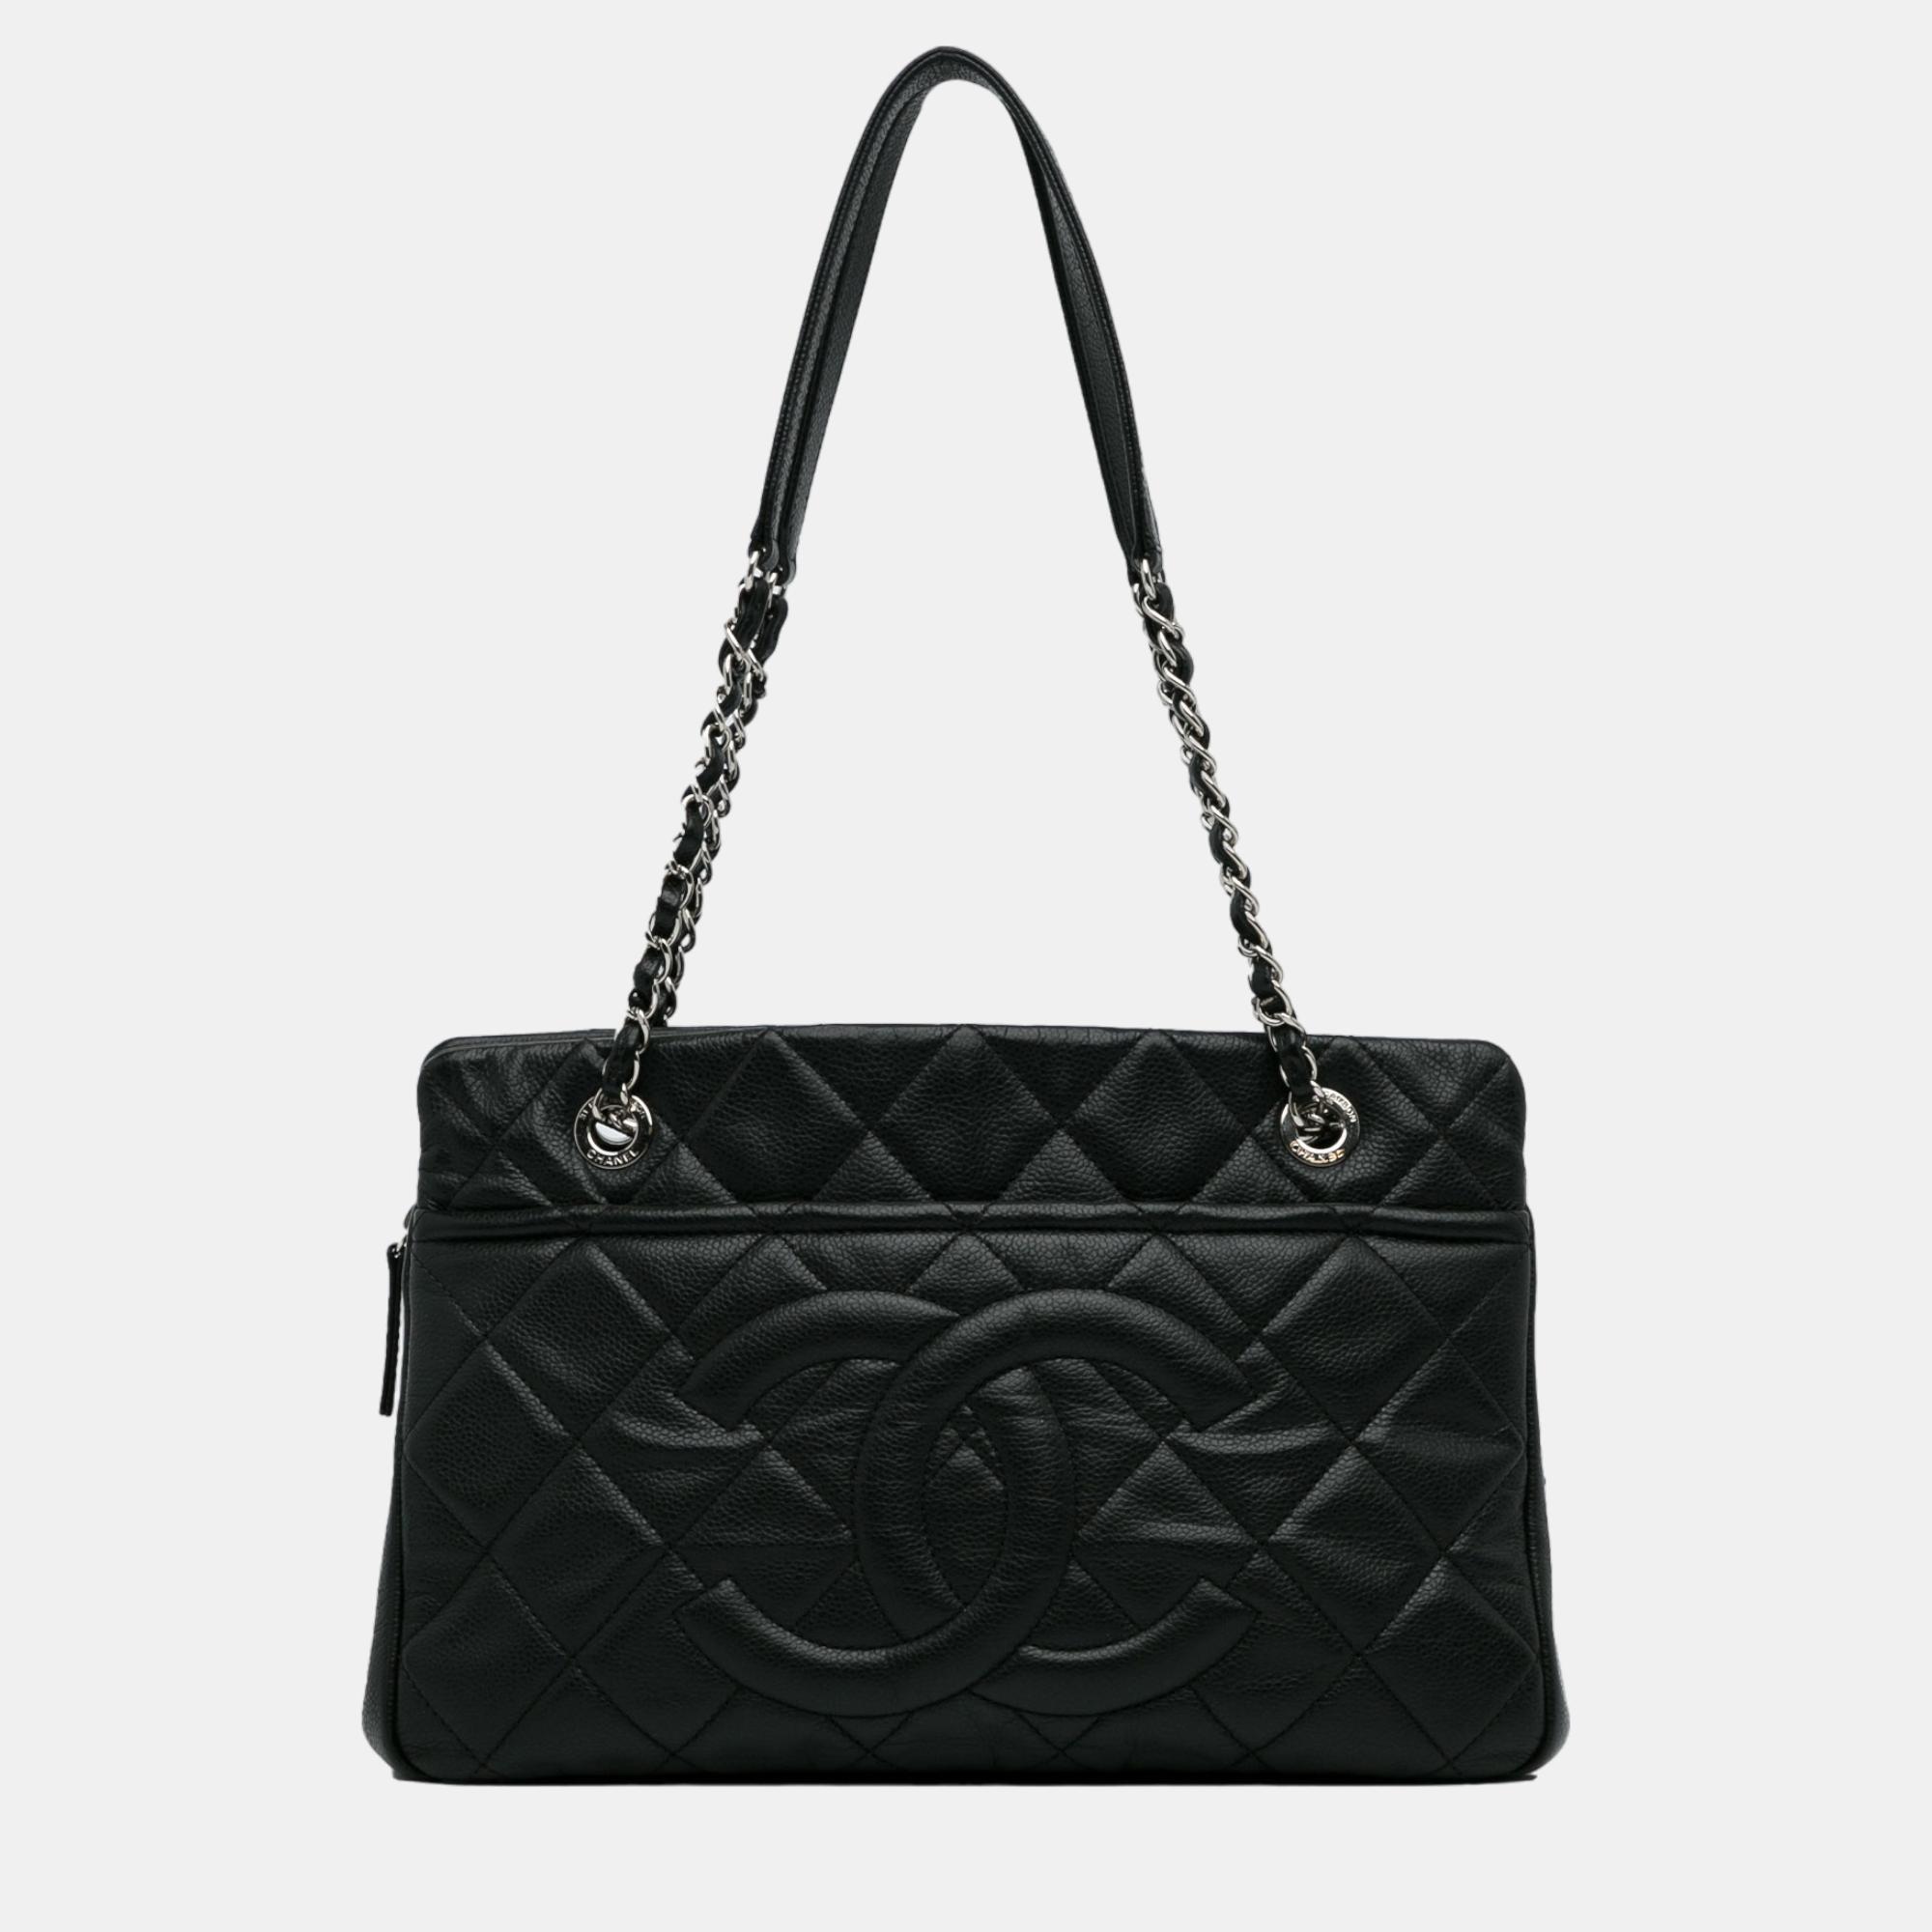 This tote bag features a quilted leather body leather woven chain straps with leather guard an open top with magnetic snap closure exterior slip pockets and interior zip and slip pockets.